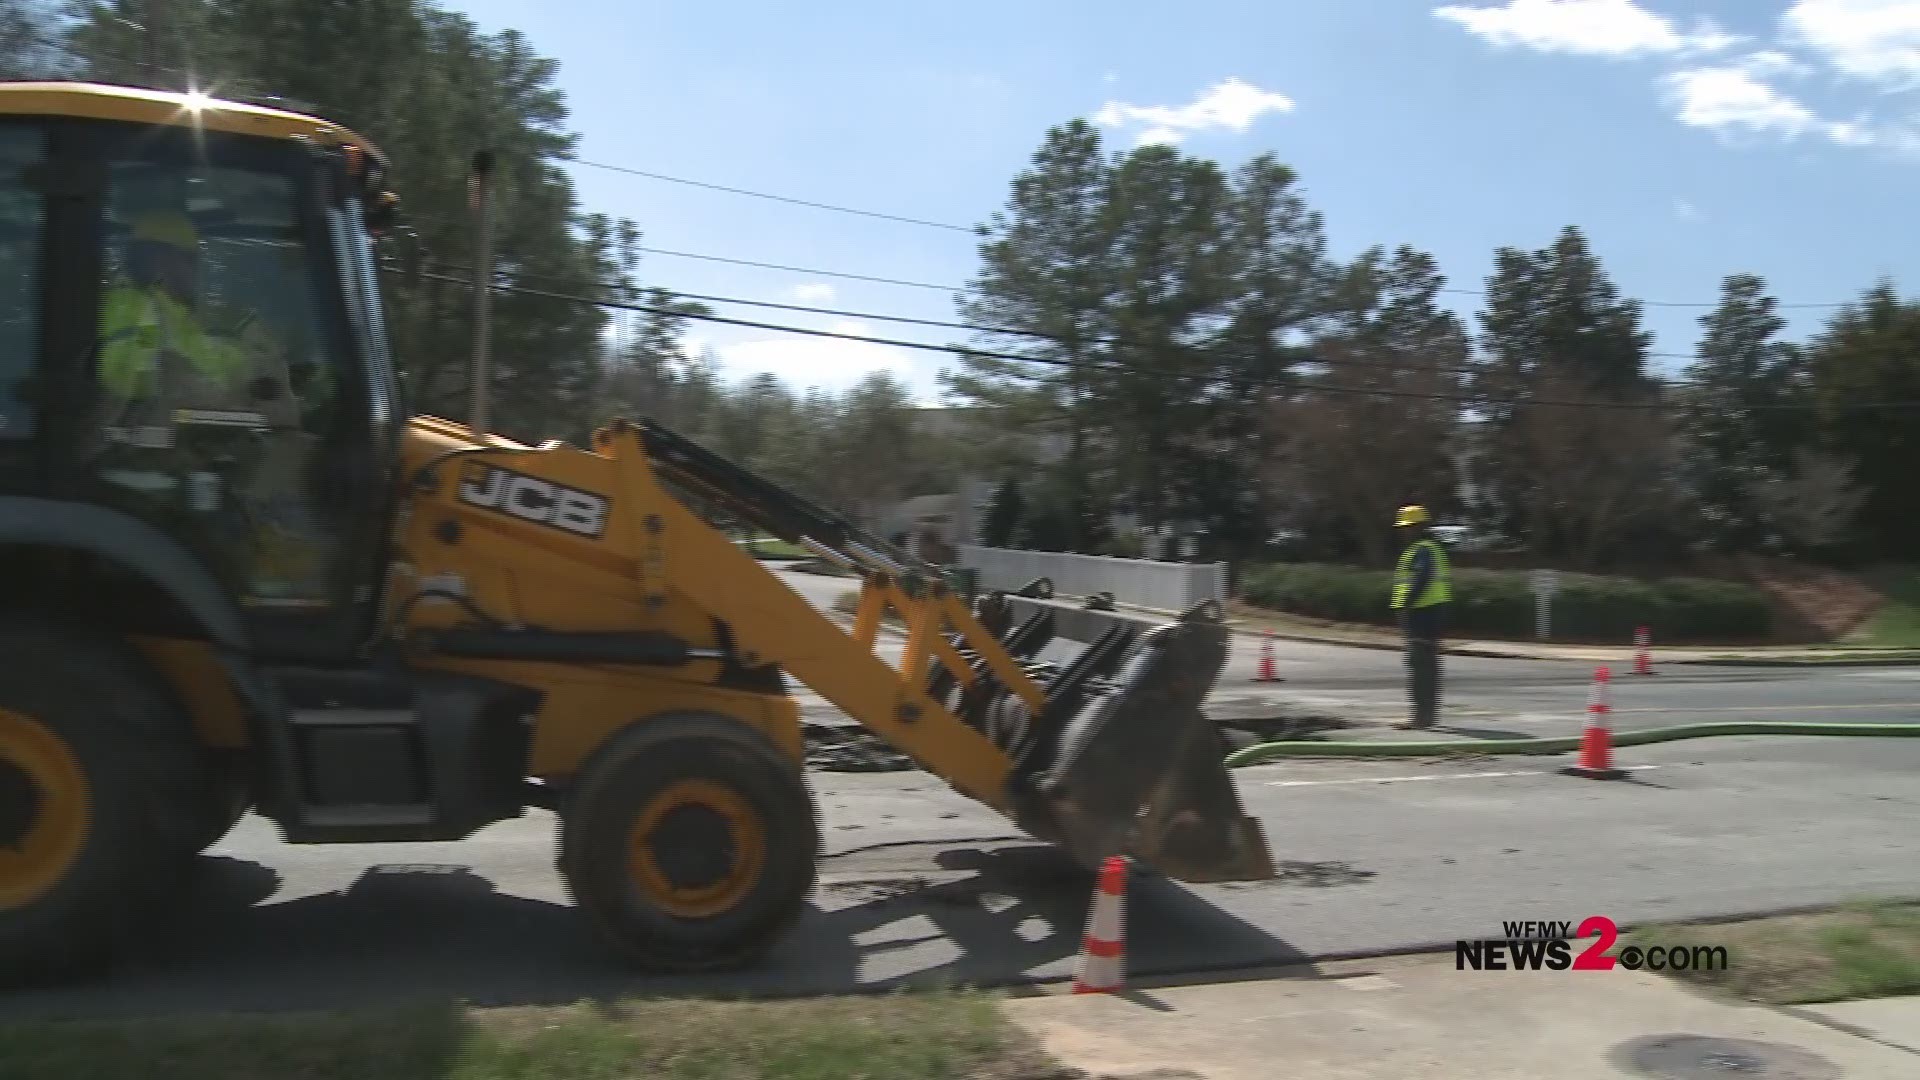 Customers were without water for several hours Friday due to the water main break.